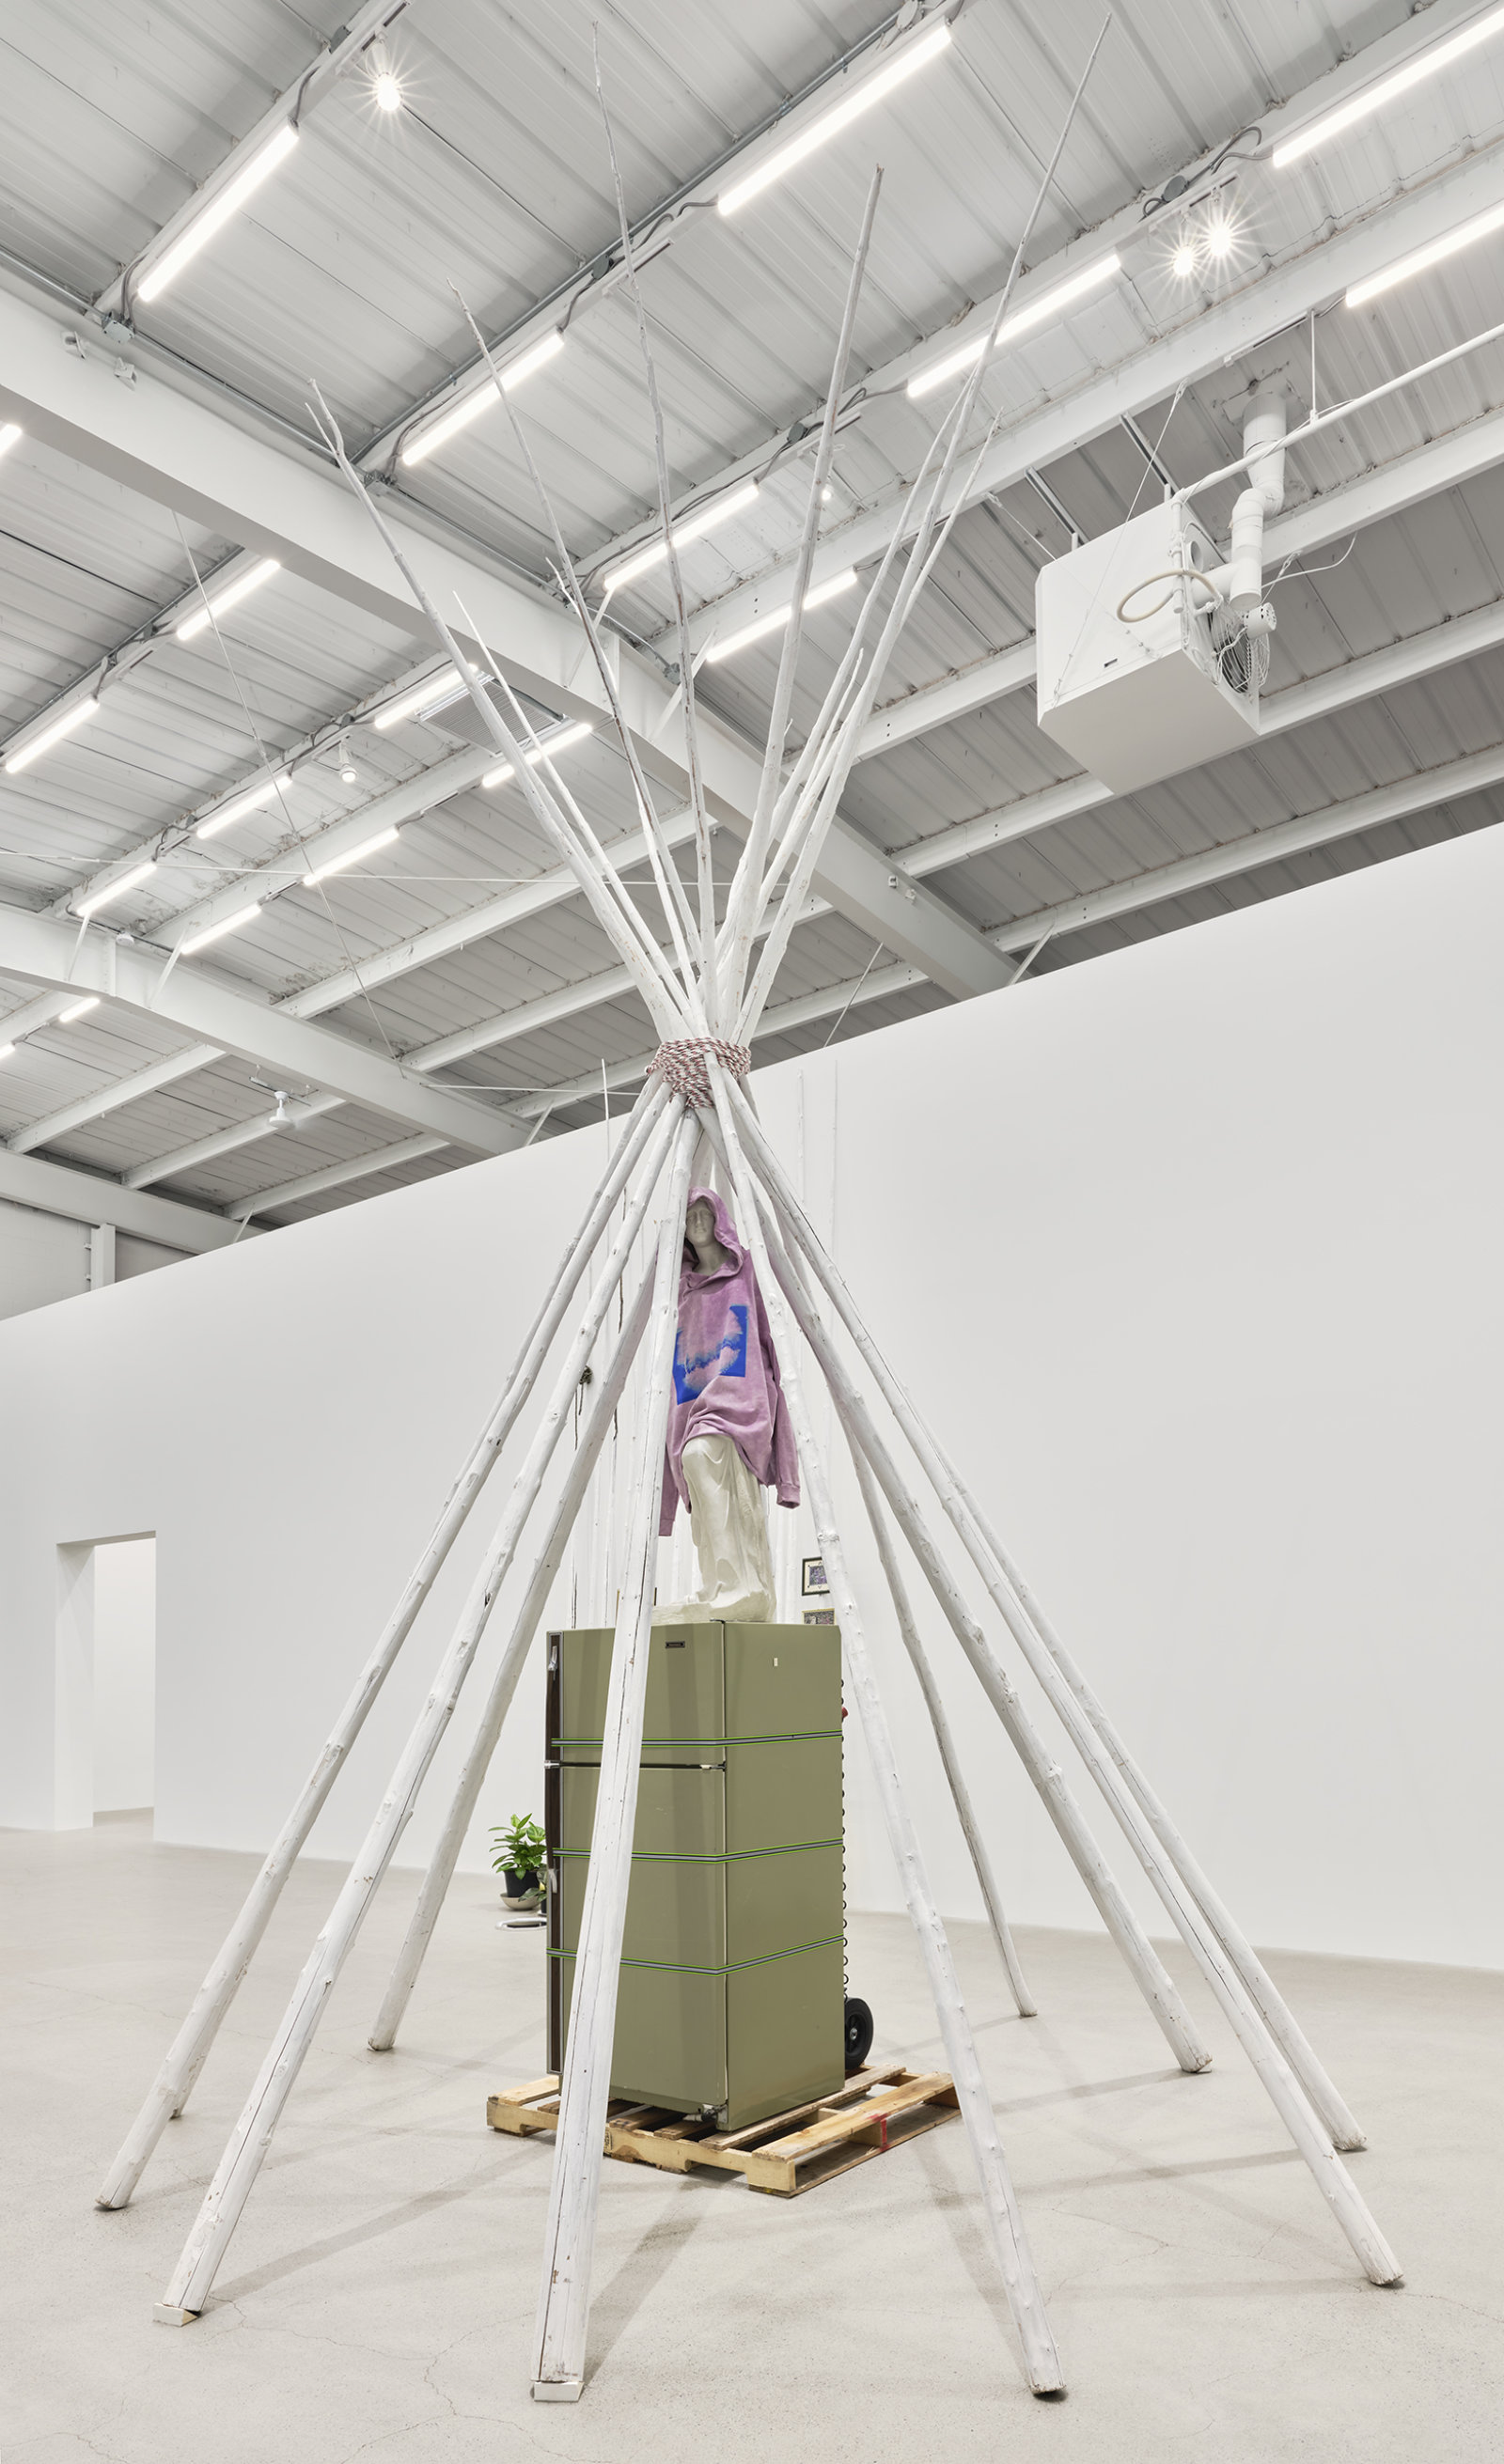 Duane Linklater, what grief conjures, 2020, tipi poles, paint, nylon rope, wooden pallet, refrigerator, tie-down straps, hand truck, plastic statue, handmade hoodie, cochineal dye, silkscreen, 249 x 160 x 160 in. (632 x 406 x 406 cm)